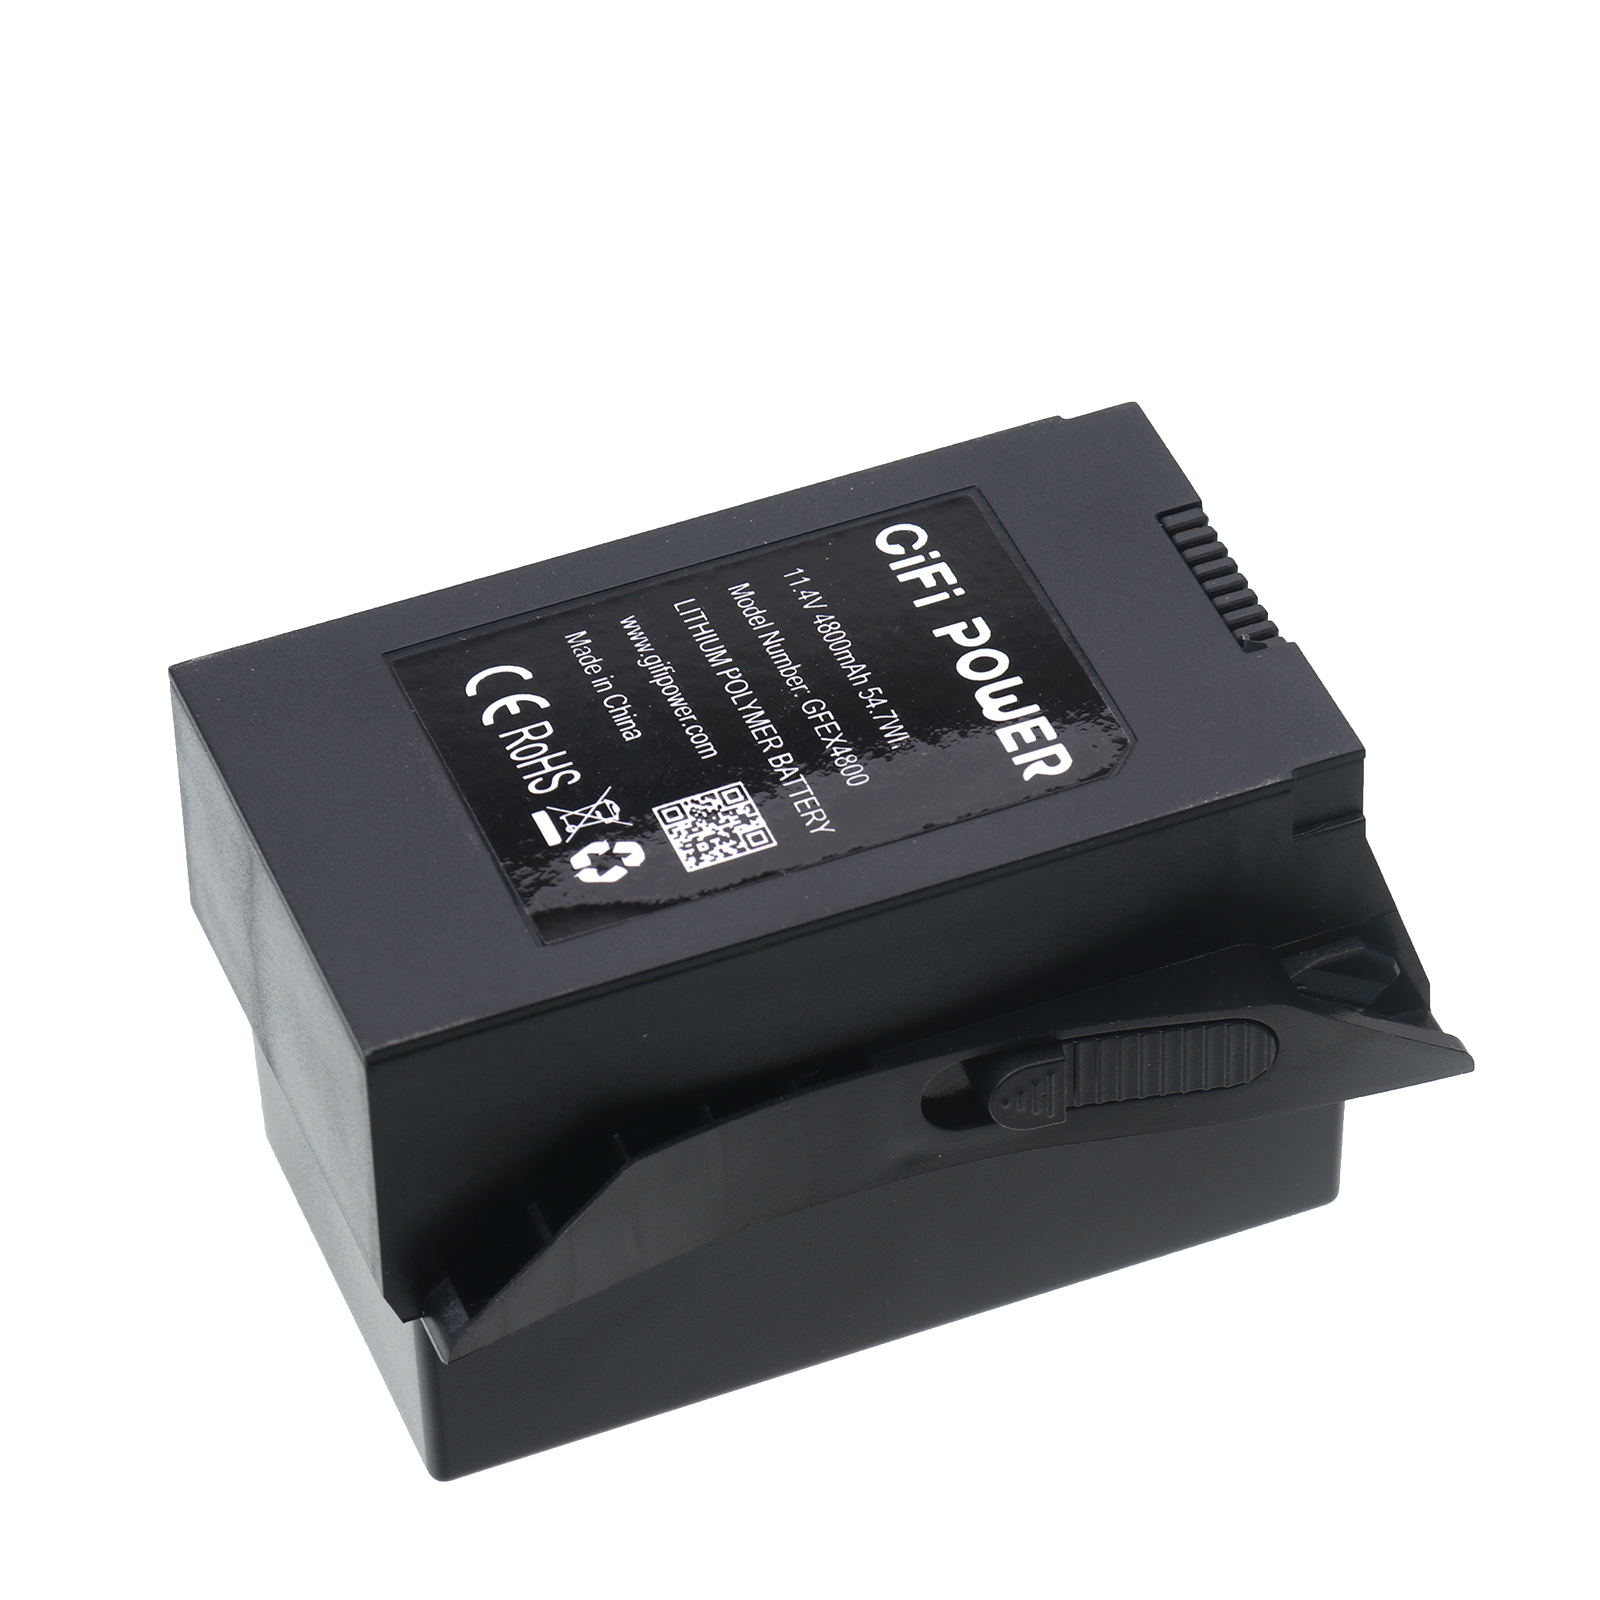 US$ 44.00 ~ US$ 55.00 - 11.4V 4800mAh Battery for Eachine EX4 Pro, JJRC X12,  CFly Faith Drone - m.gifipower.com